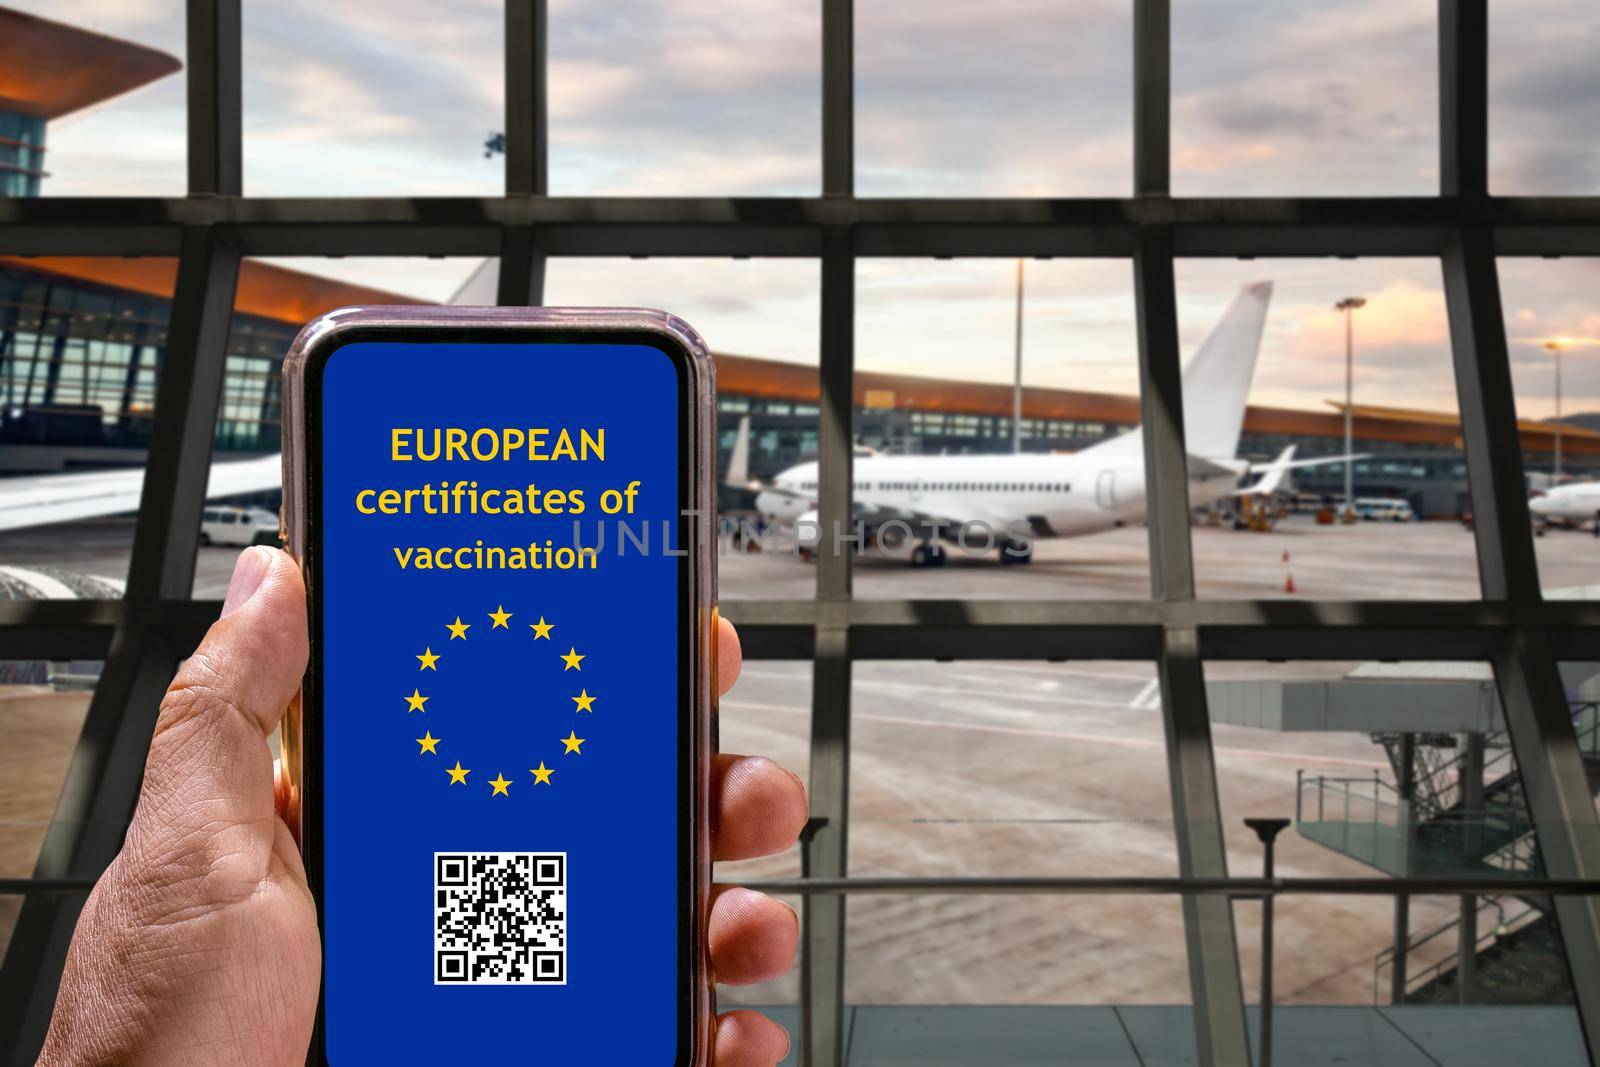 EU digital Covid vaccination certificate on moble phone. by toa55